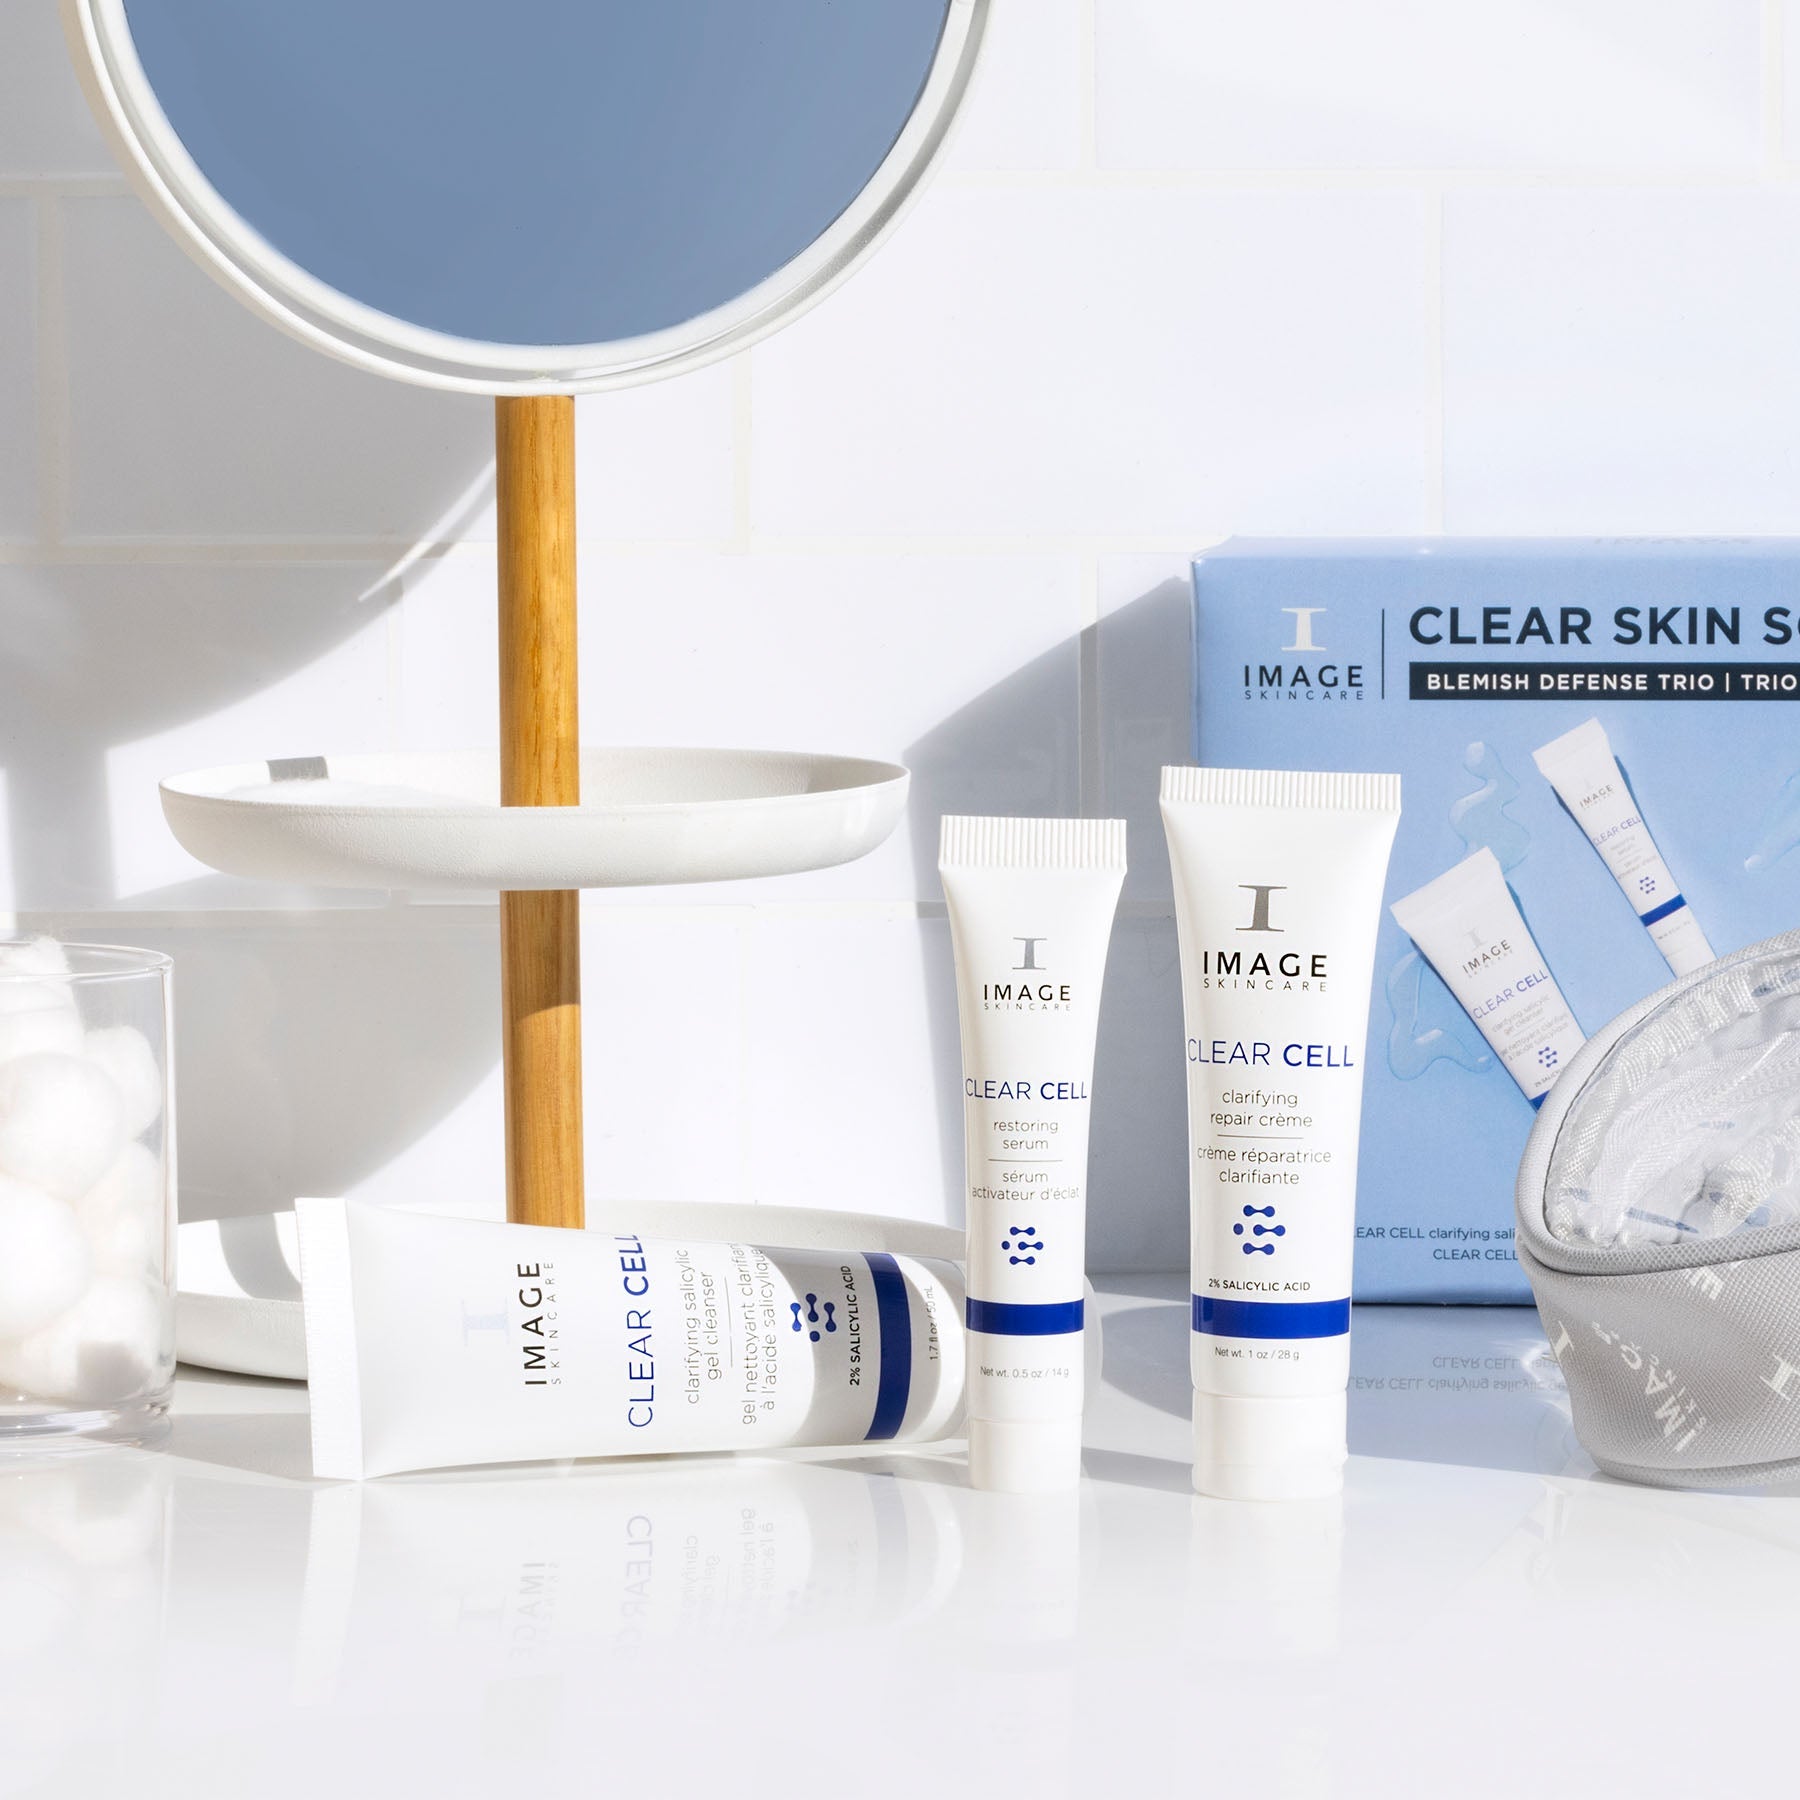 CLEAR SKIN SOLUTIONS Blemish Defense Trio